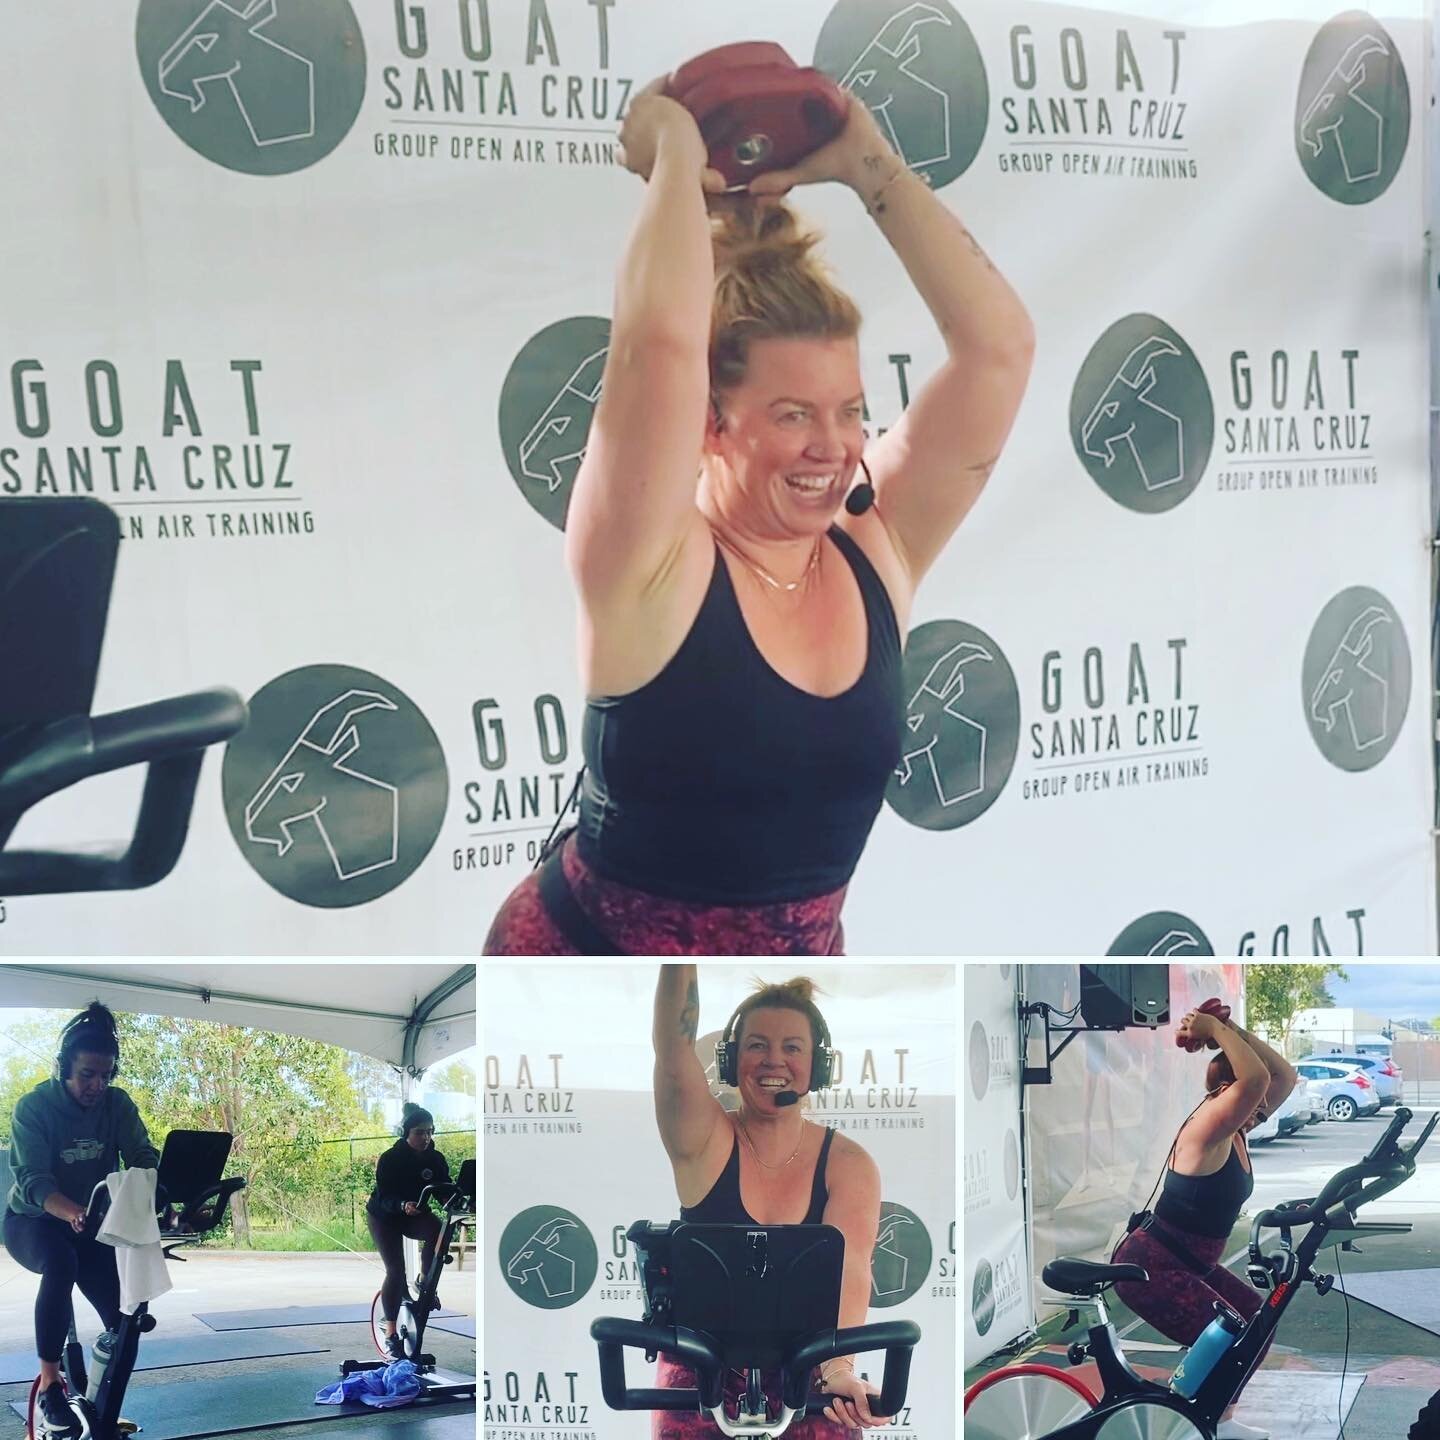 Fun NEW workout happening on Mondays at 4:15p. Cycle Barre with Lindsey. The best of both, first half - get great cardio on the bike, second half - tone and stretch. 
A great way to start the week!